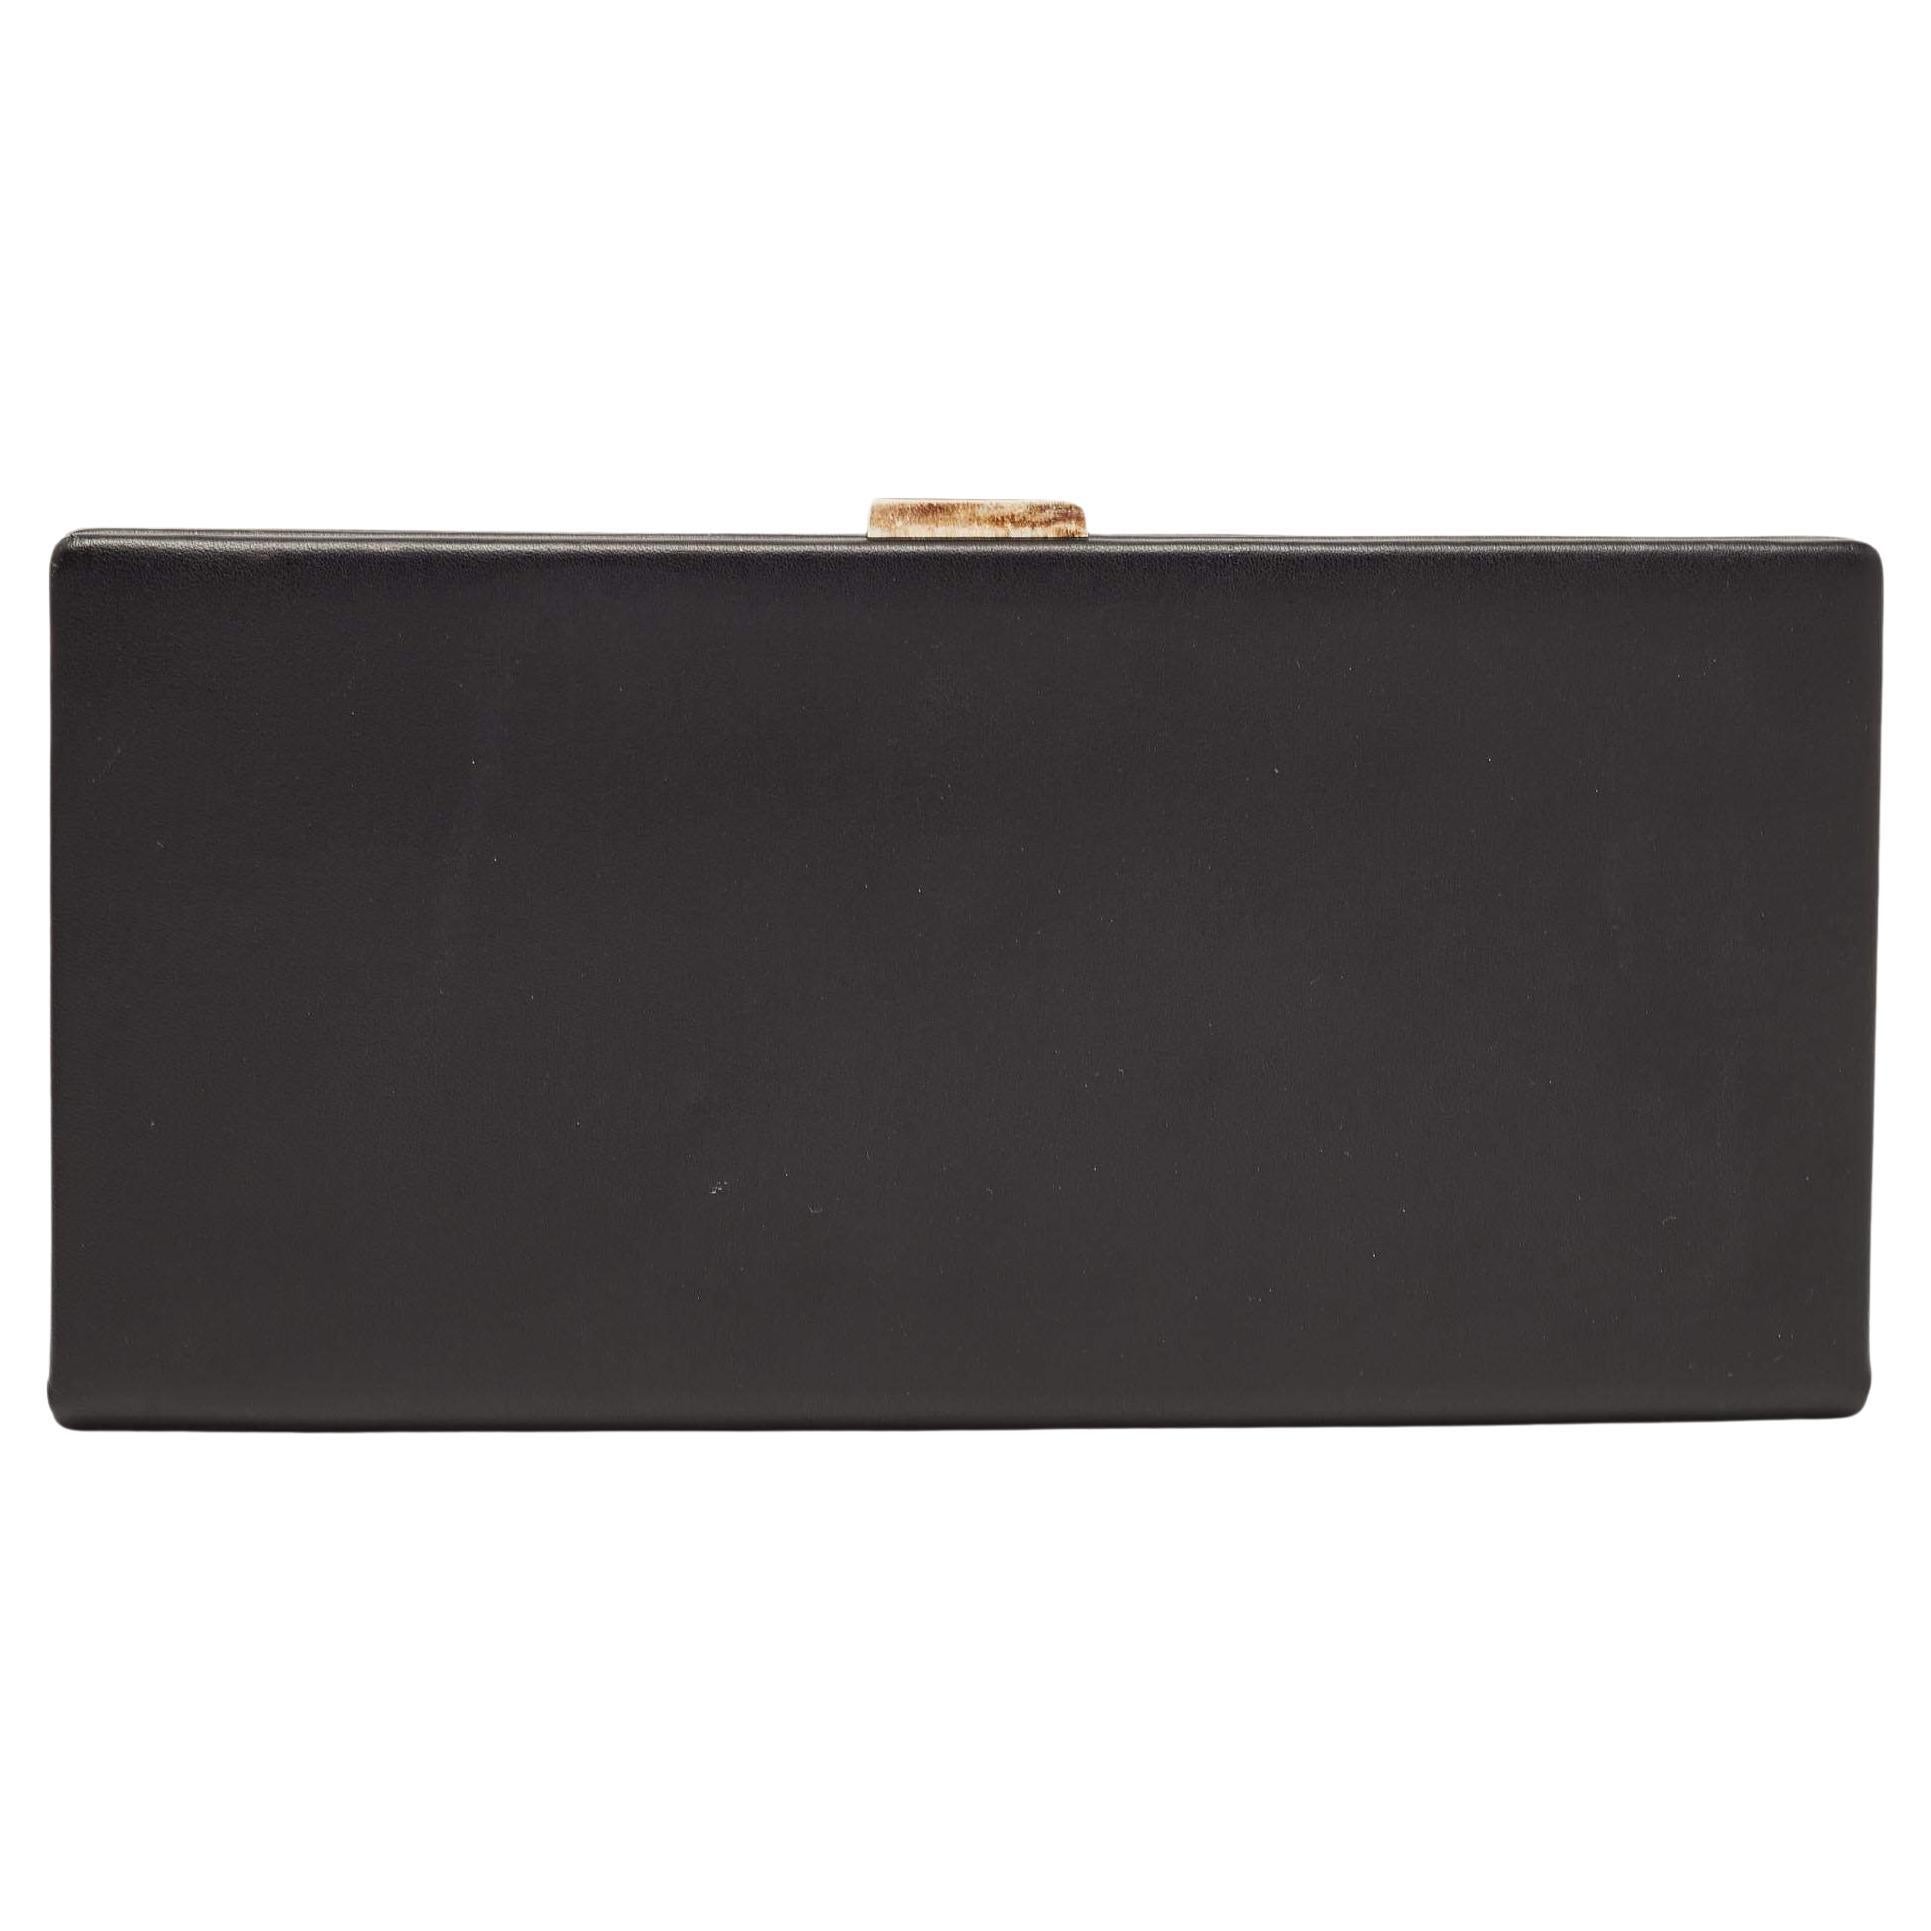 Cartier Black Patent Leather Frame Clutch For Sale